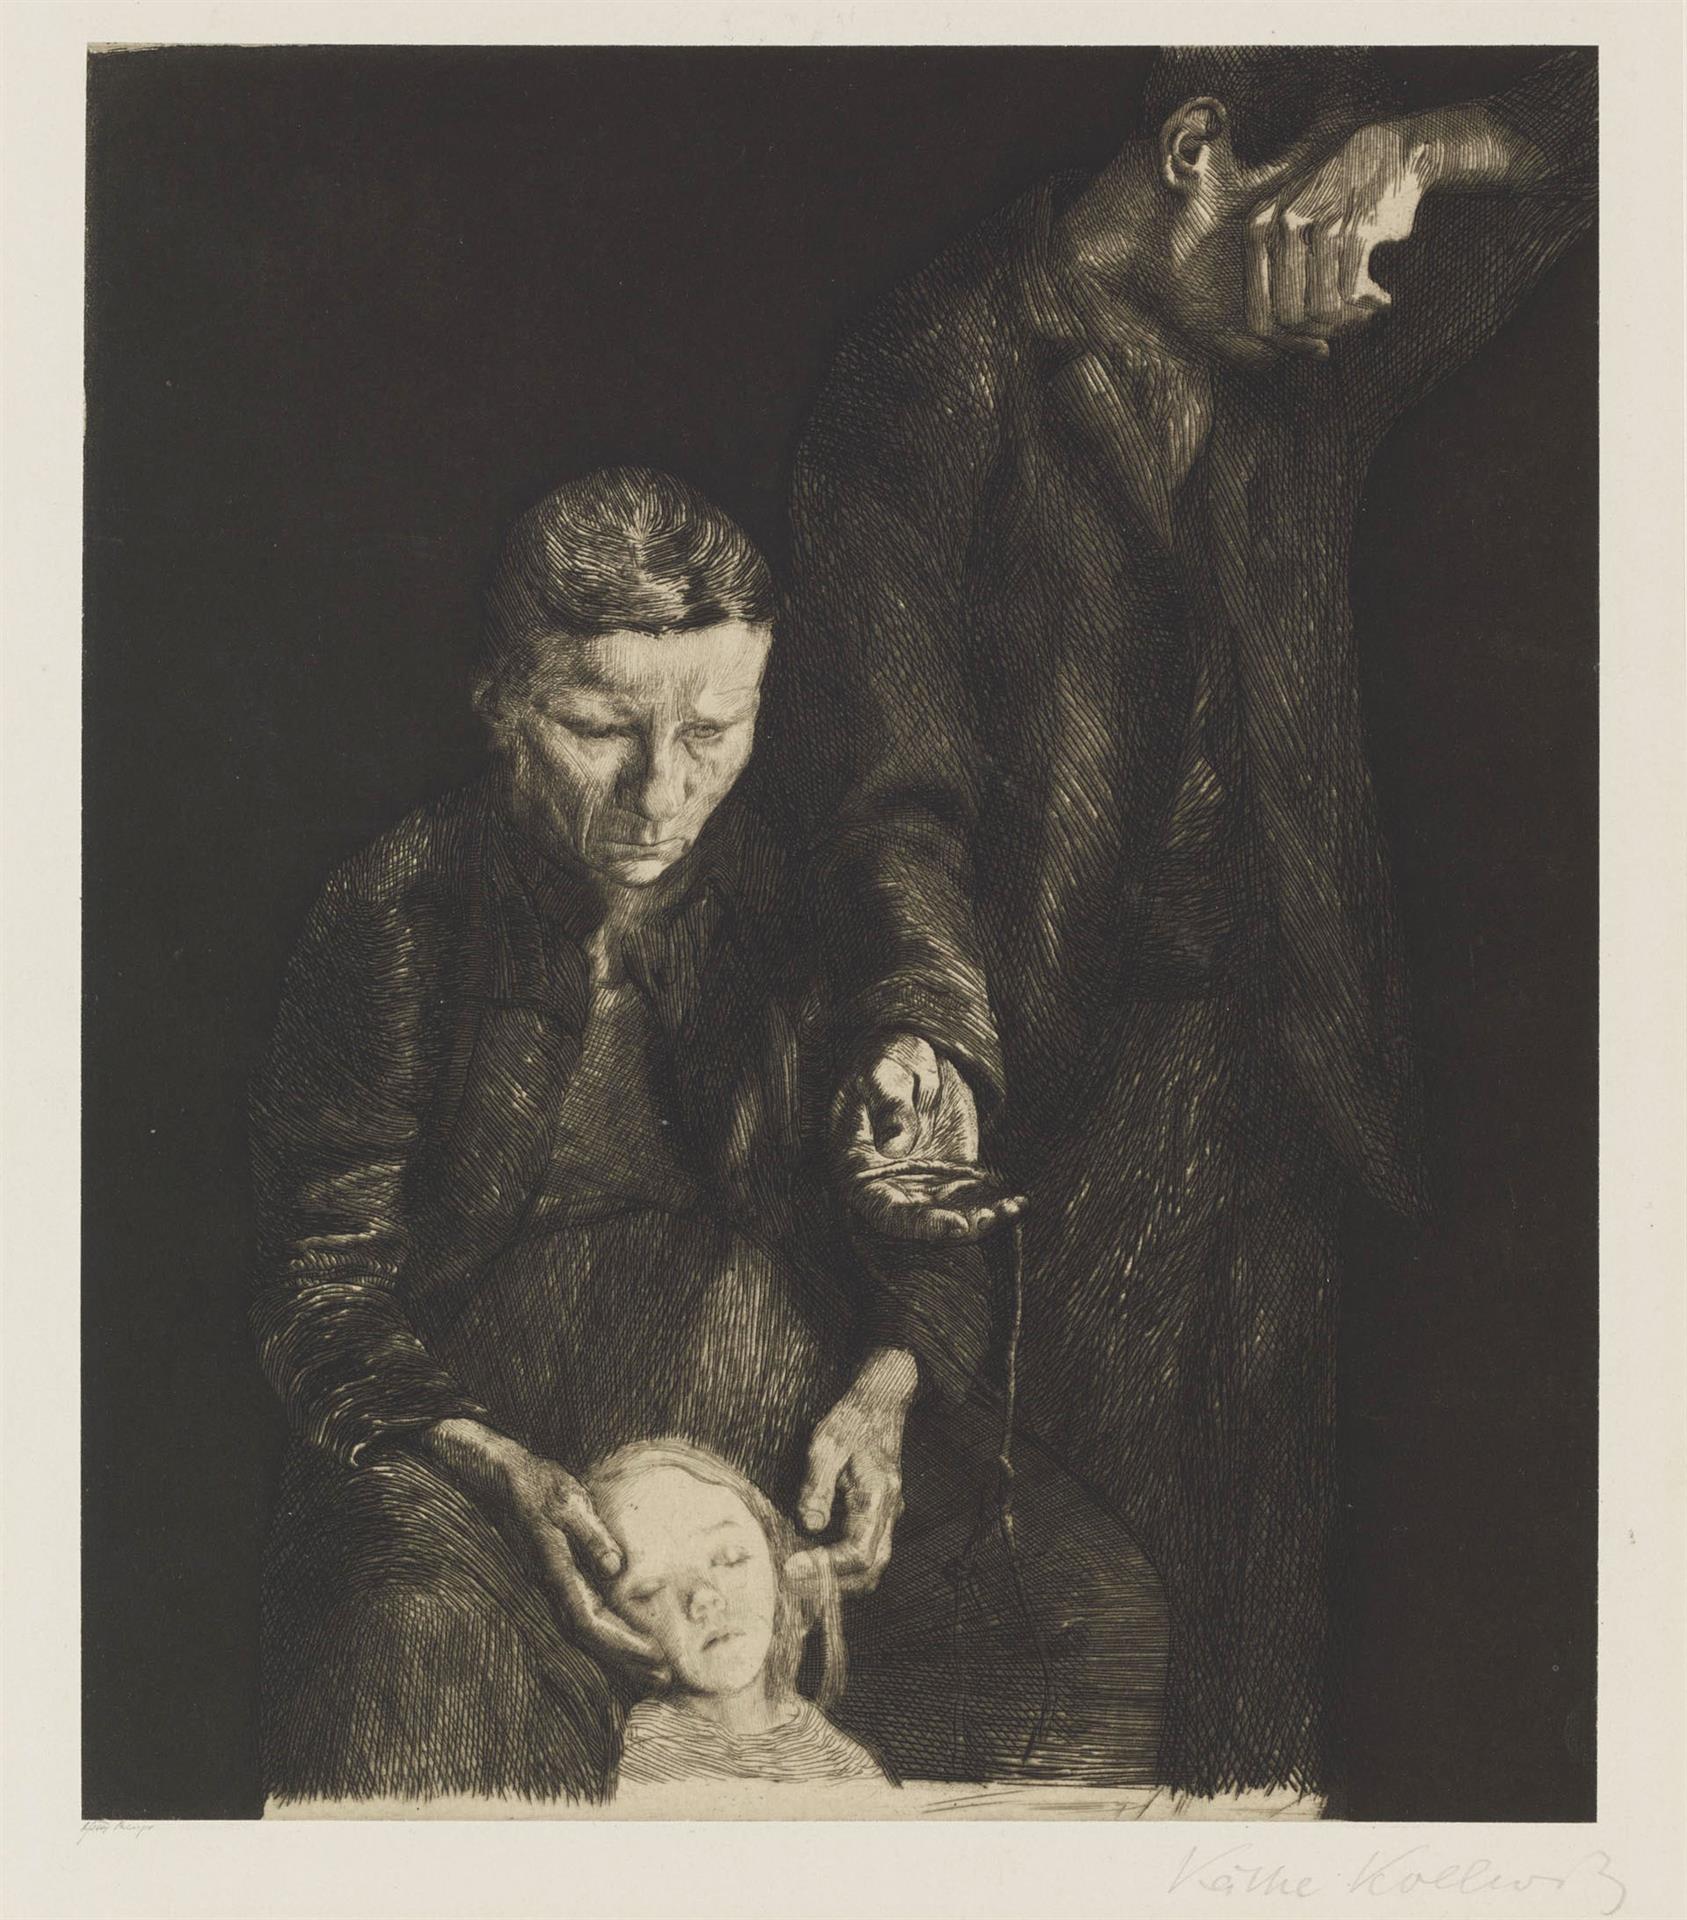 Käthe Kollwitz, The Downtrodden – Poor Family, left scene of the composition originally in three sections, 1901, line etching, drypoint, aquatint and burnisher, Kn 49bis II A b Cologne Kollwitz Collection © Käthe Kollwitz Museum Köln